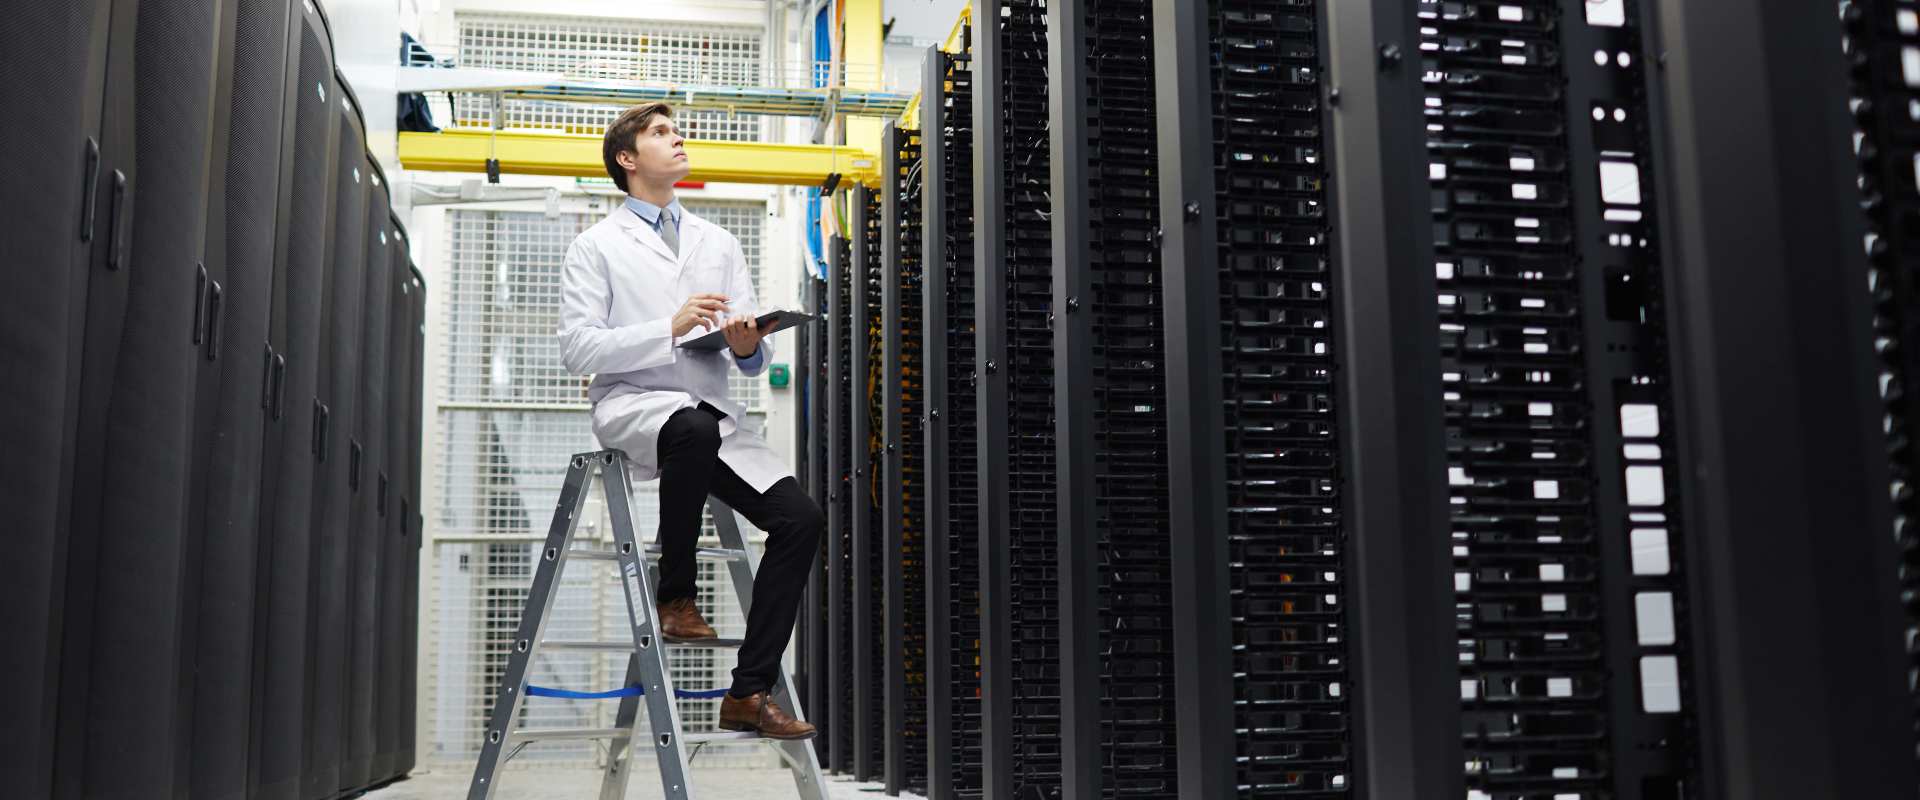 background image of a IT professional sitting next to servers